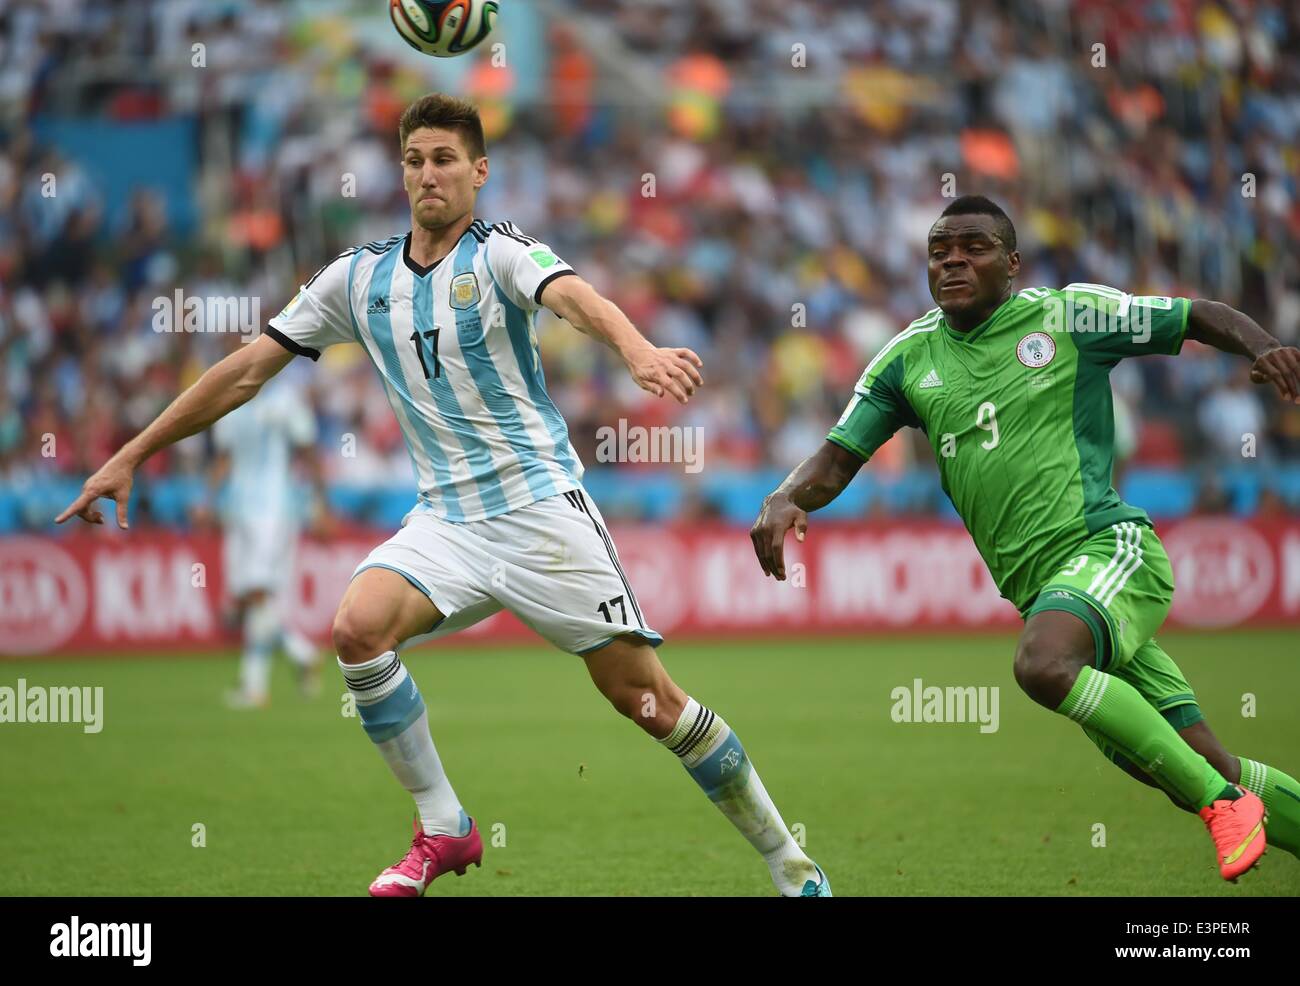 Porto Alegre, Brazil. 25th June, 2014. Argentina's Federico Fernandez (L) vies with Nigeria's Emmanuel Emenike during a Group F match between Nigeria and Argentina of 2014 FIFA World Cup at the Estadio Beira-Rio Stadium in Porto Alegre, Brazil, on June 25, 2014. © Li Ga/Xinhua/Alamy Live News Stock Photo